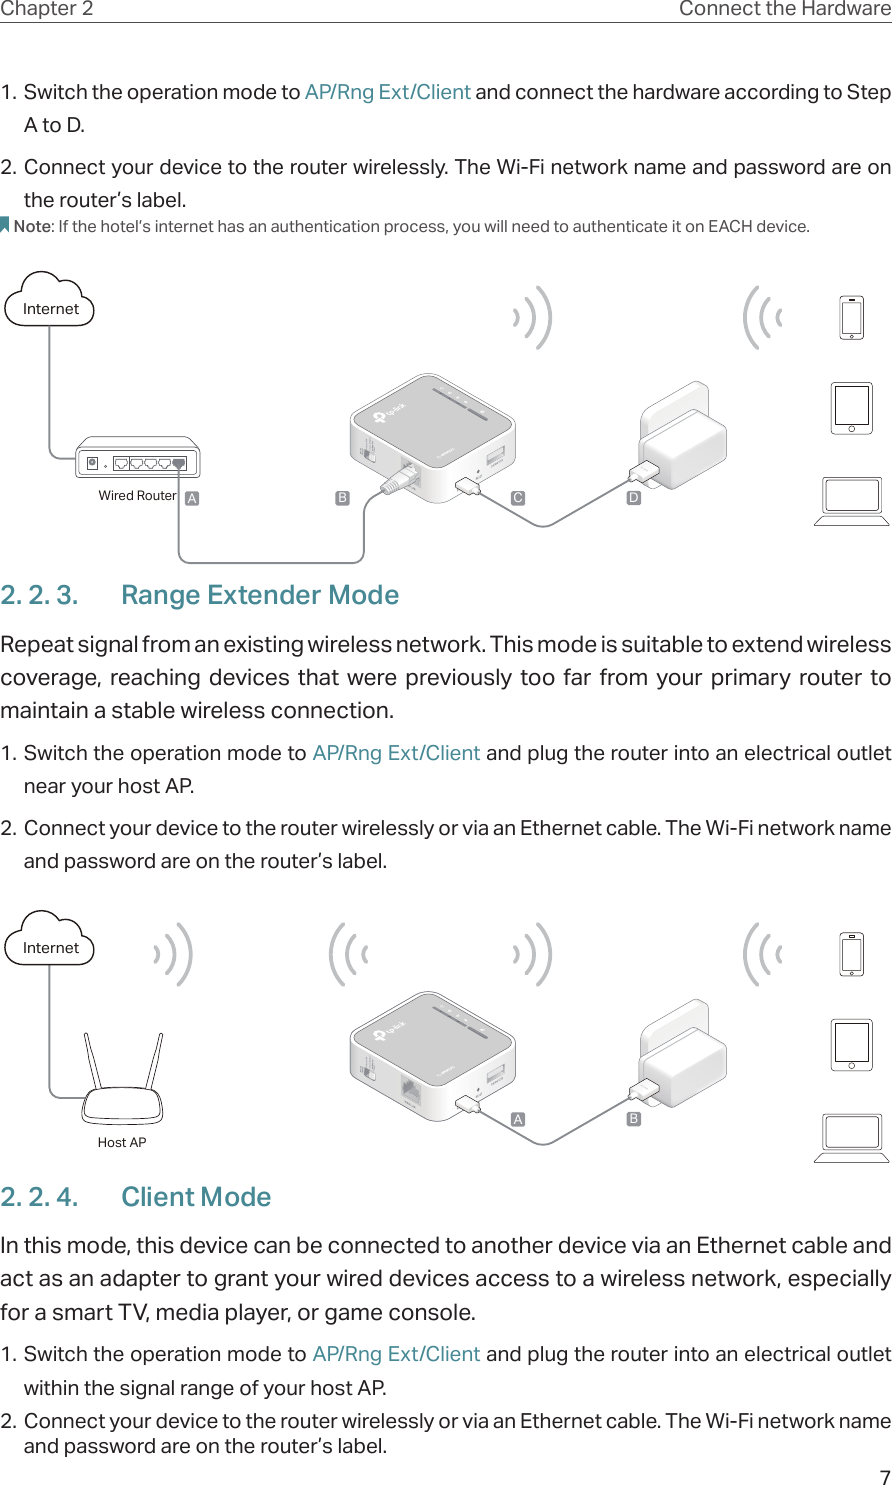 7Chapter 2 Connect the Hardware1. Switch the operation mode to AP/Rng Ext/Client and connect the hardware according to Step A to D.2. Connect your device to the router wirelessly. The Wi-Fi network name and password are on the router’s label.Note: If the hotel’s internet has an authentication process, you will need to authenticate it on EACH device.InternetB C DAWired Router2. 2. 3.  Range Extender ModeRepeat signal from an existing wireless network. This mode is suitable to extend wireless coverage, reaching devices that were previously too far from your primary router to maintain a stable wireless connection.1. Switch the operation mode to AP/Rng Ext/Client and plug the router into an electrical outlet near your host AP.2. Connect your device to the router wirelessly or via an Ethernet cable. The Wi-Fi network name and password are on the router’s label.InternetABHost AP2. 2. 4.  Client ModeIn this mode, this device can be connected to another device via an Ethernet cable and act as an adapter to grant your wired devices access to a wireless network, especially for a smart TV, media player, or game console.1. Switch the operation mode to AP/Rng Ext/Client and plug the router into an electrical outlet within the signal range of your host AP.2. Connect your device to the router wirelessly or via an Ethernet cable. The Wi-Fi network name and password are on the router’s label.